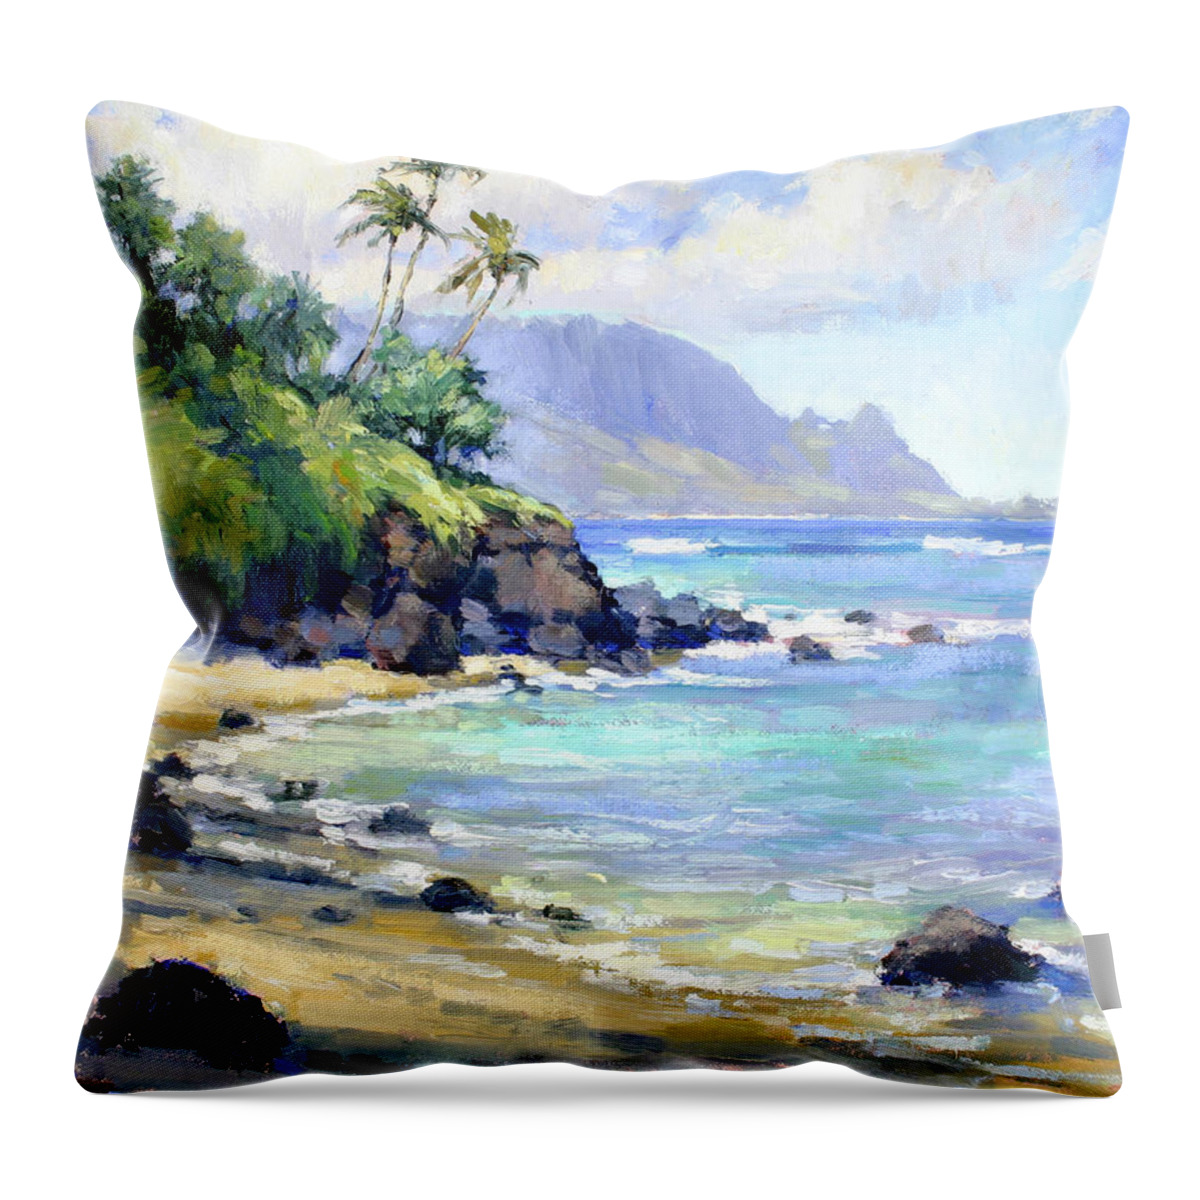 Hawaii Throw Pillow featuring the painting So Many Magic Colors by Jenifer Prince